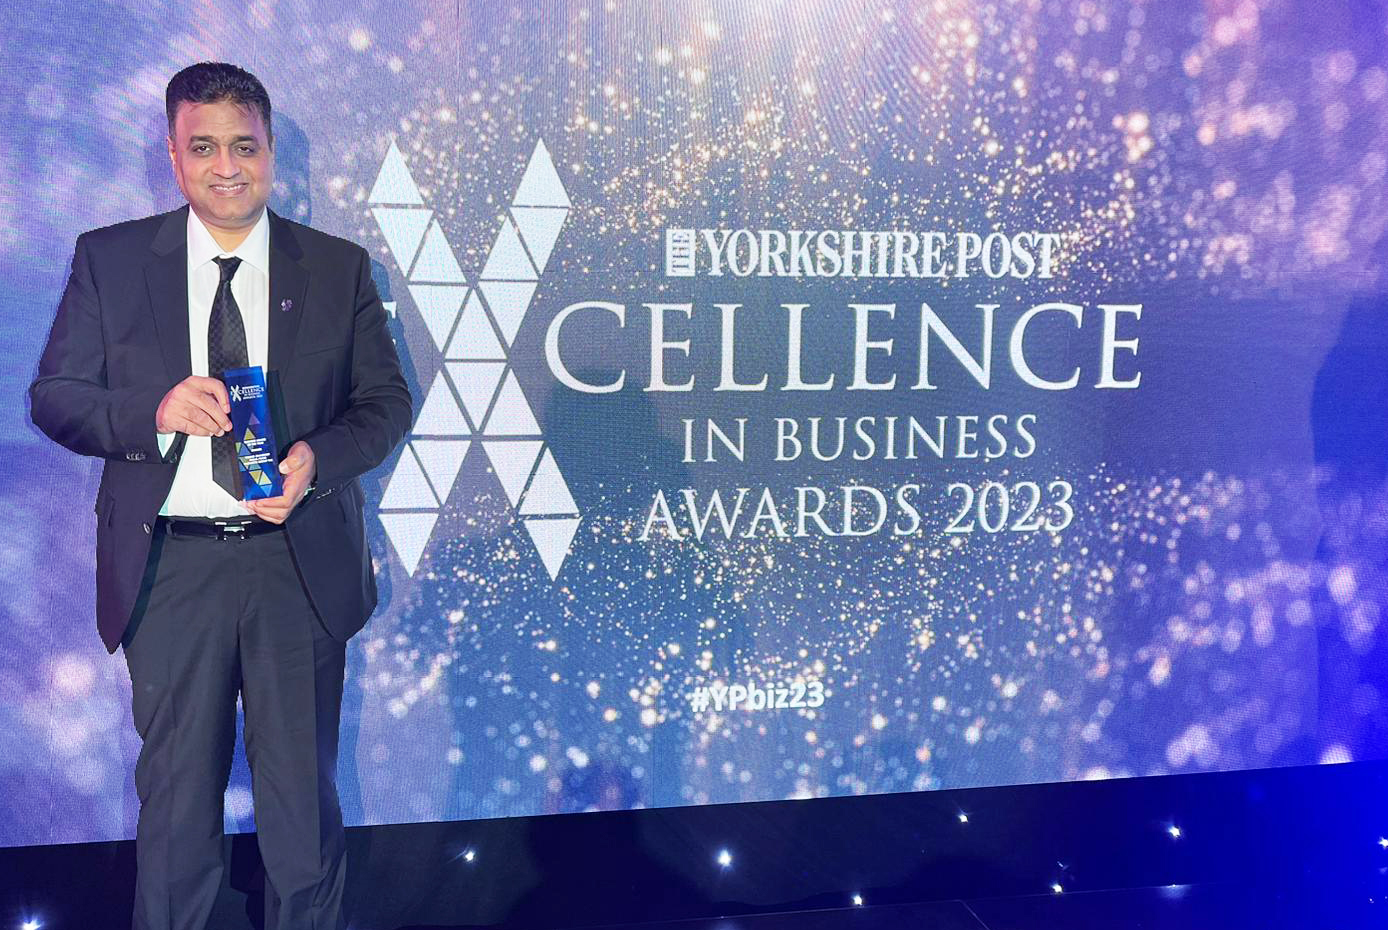 CEO Younis Chaudhry Crowned Business Leader of the Year Award at the Yorkshire Post Awards